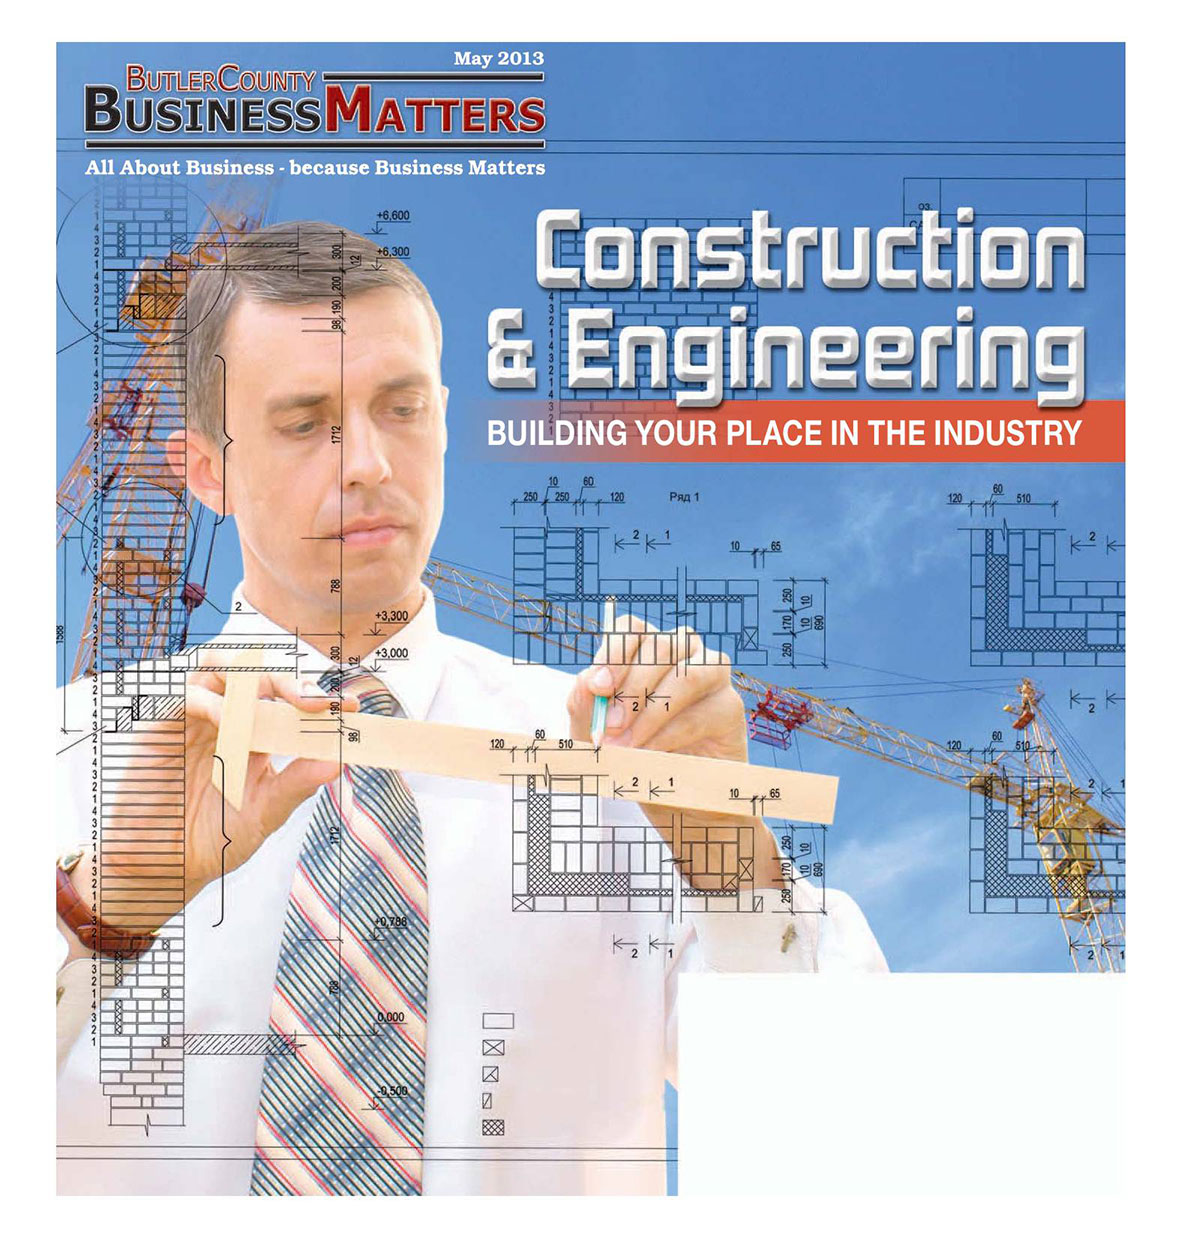 May 2013 - Construction & Engineering - Building Your Place In the Industry